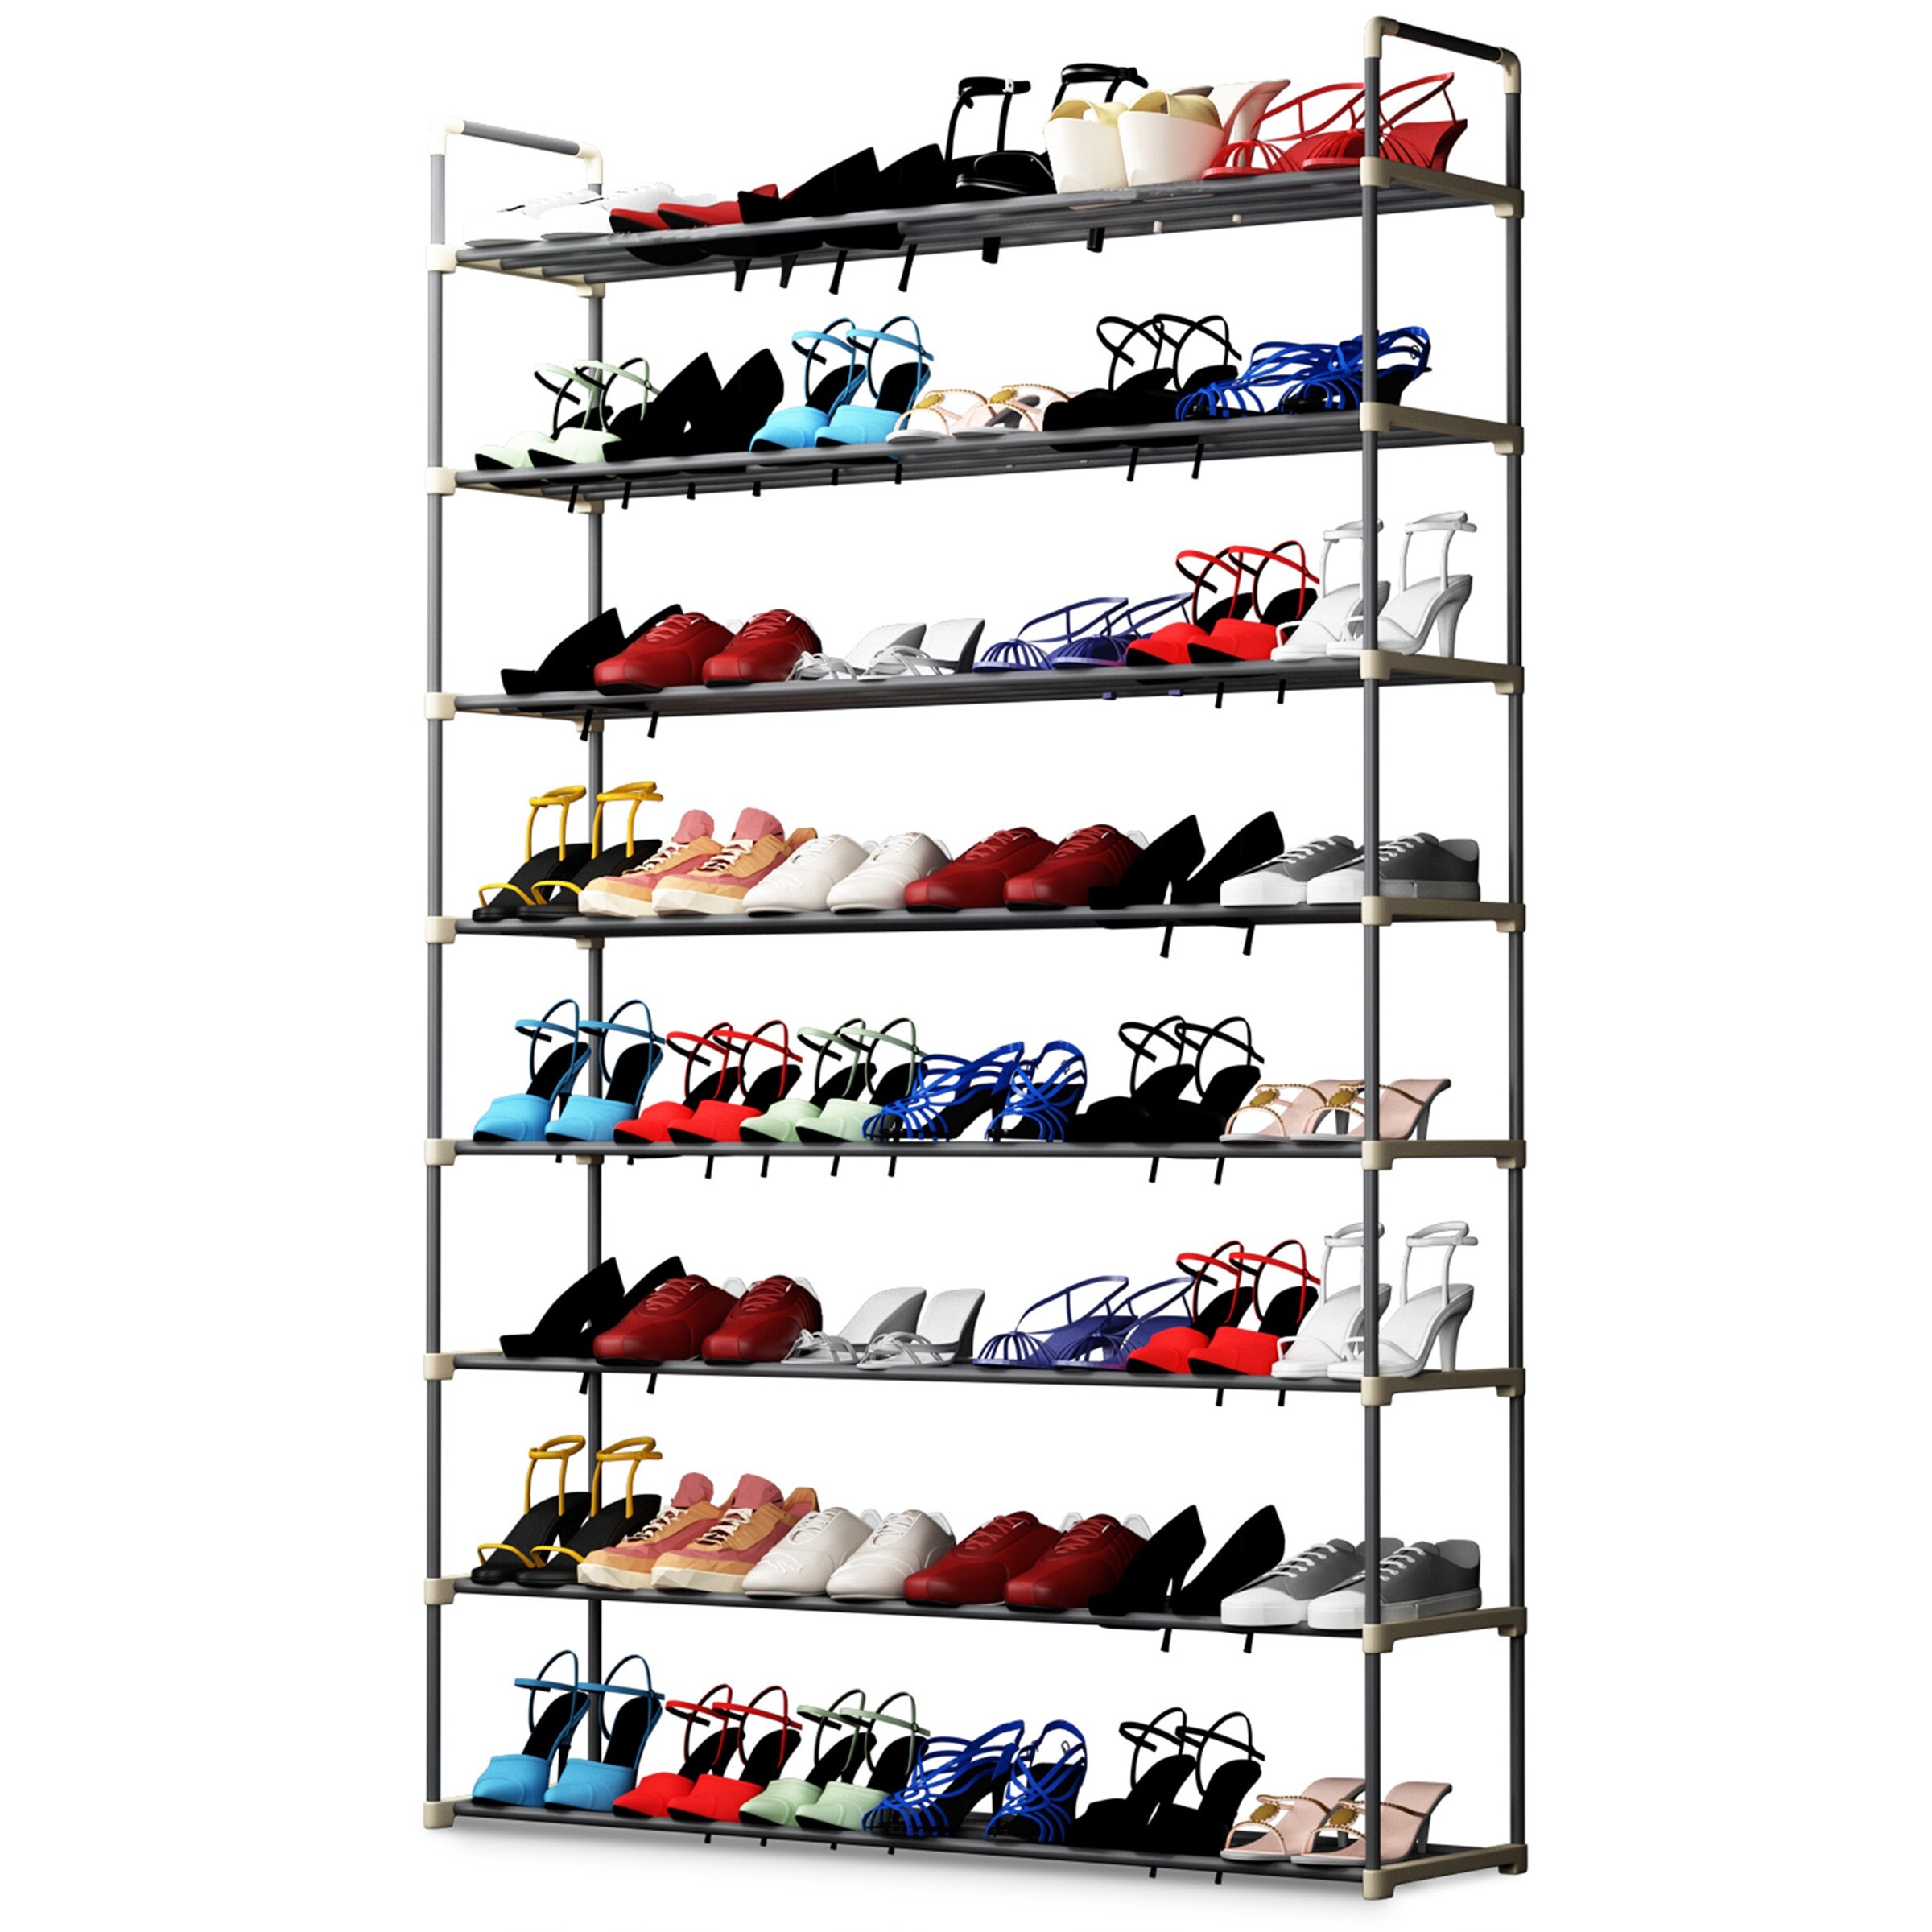 https://ak1.ostkcdn.com/images/products/is/images/direct/460aa28f3f80d058e5ed5cf19fad71dd2c0b952a/Hastings-Home-Multi-Tier-Shoe-Storage-Rack.jpg